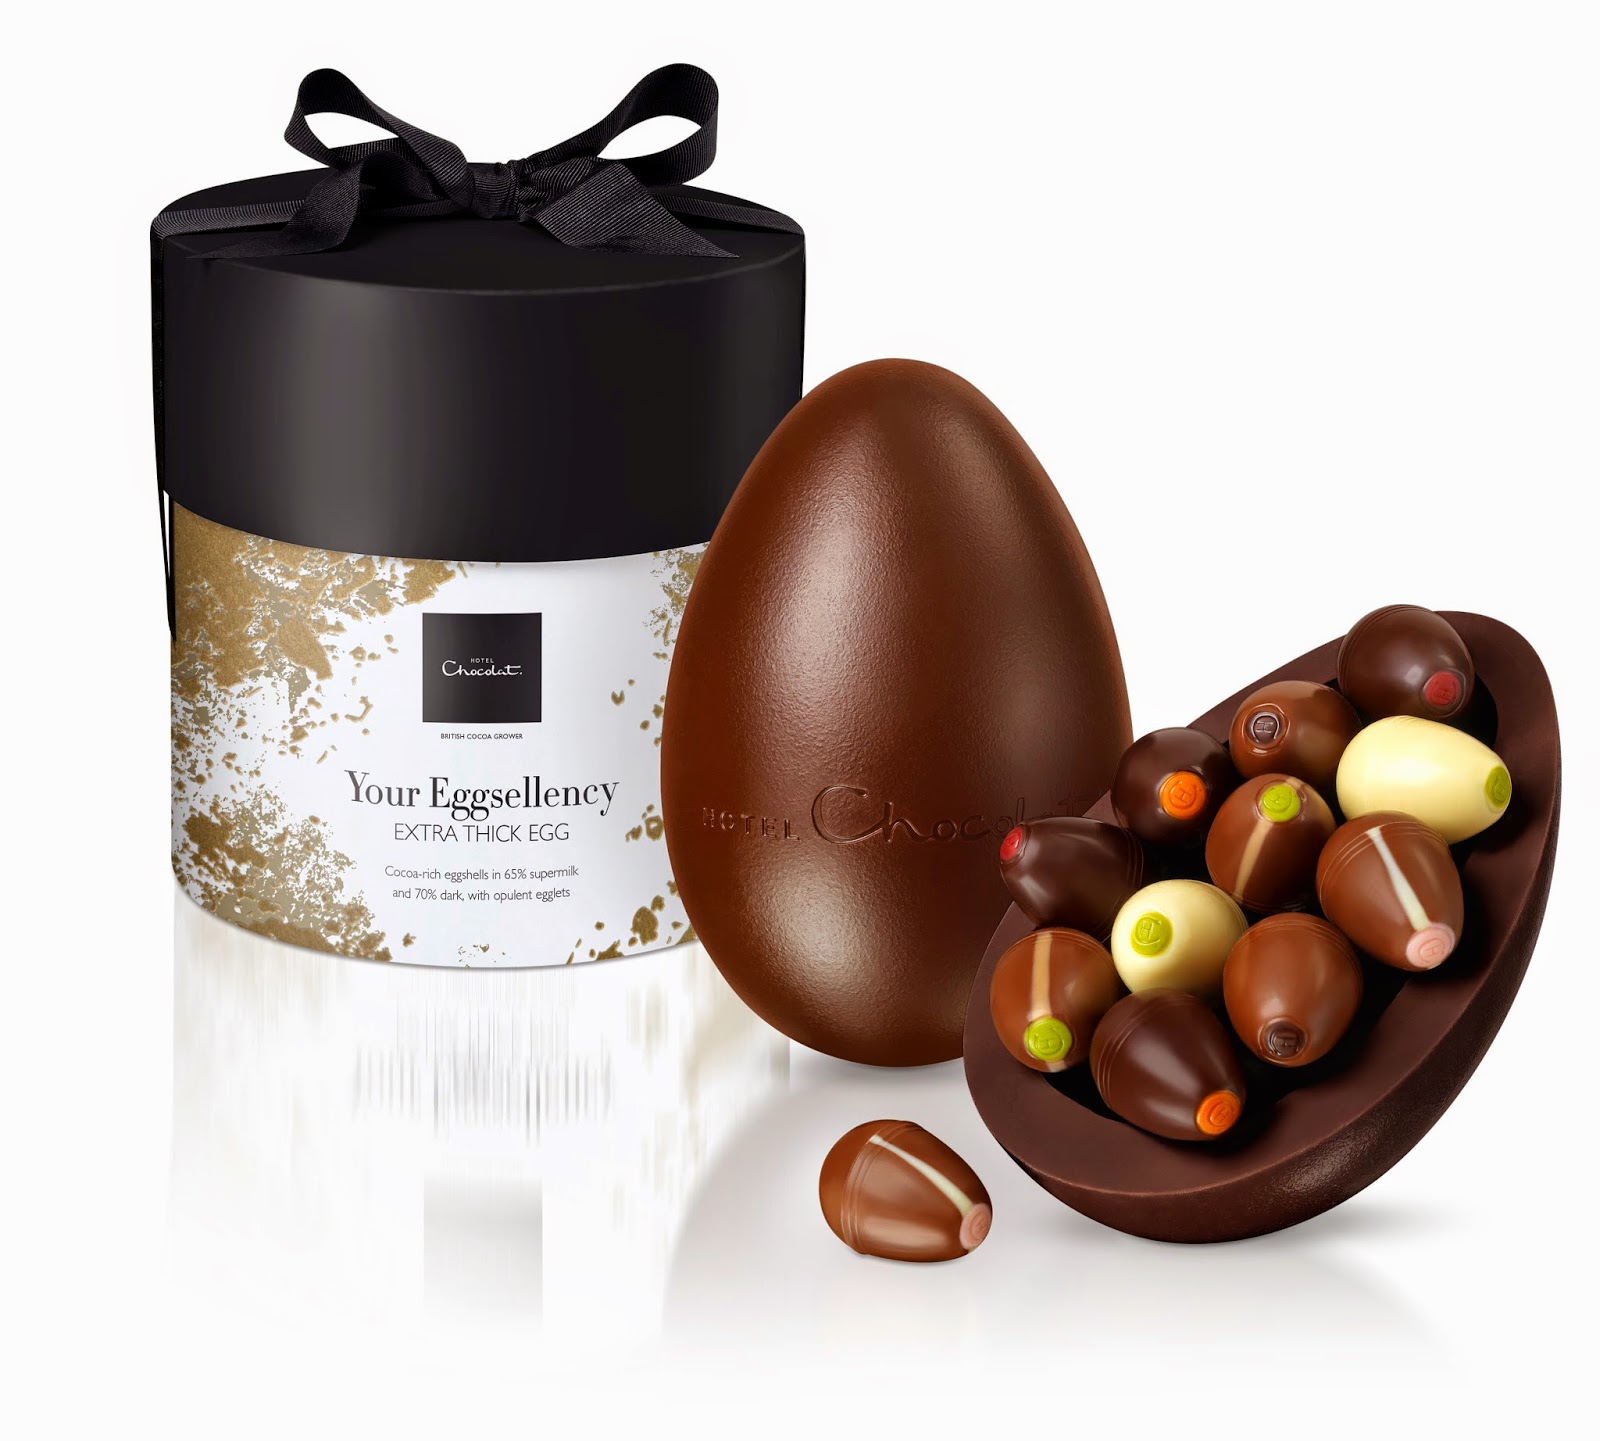 Chance to win a Hotel Chocolat Easter Egg and making up a foodie quizz for the folks